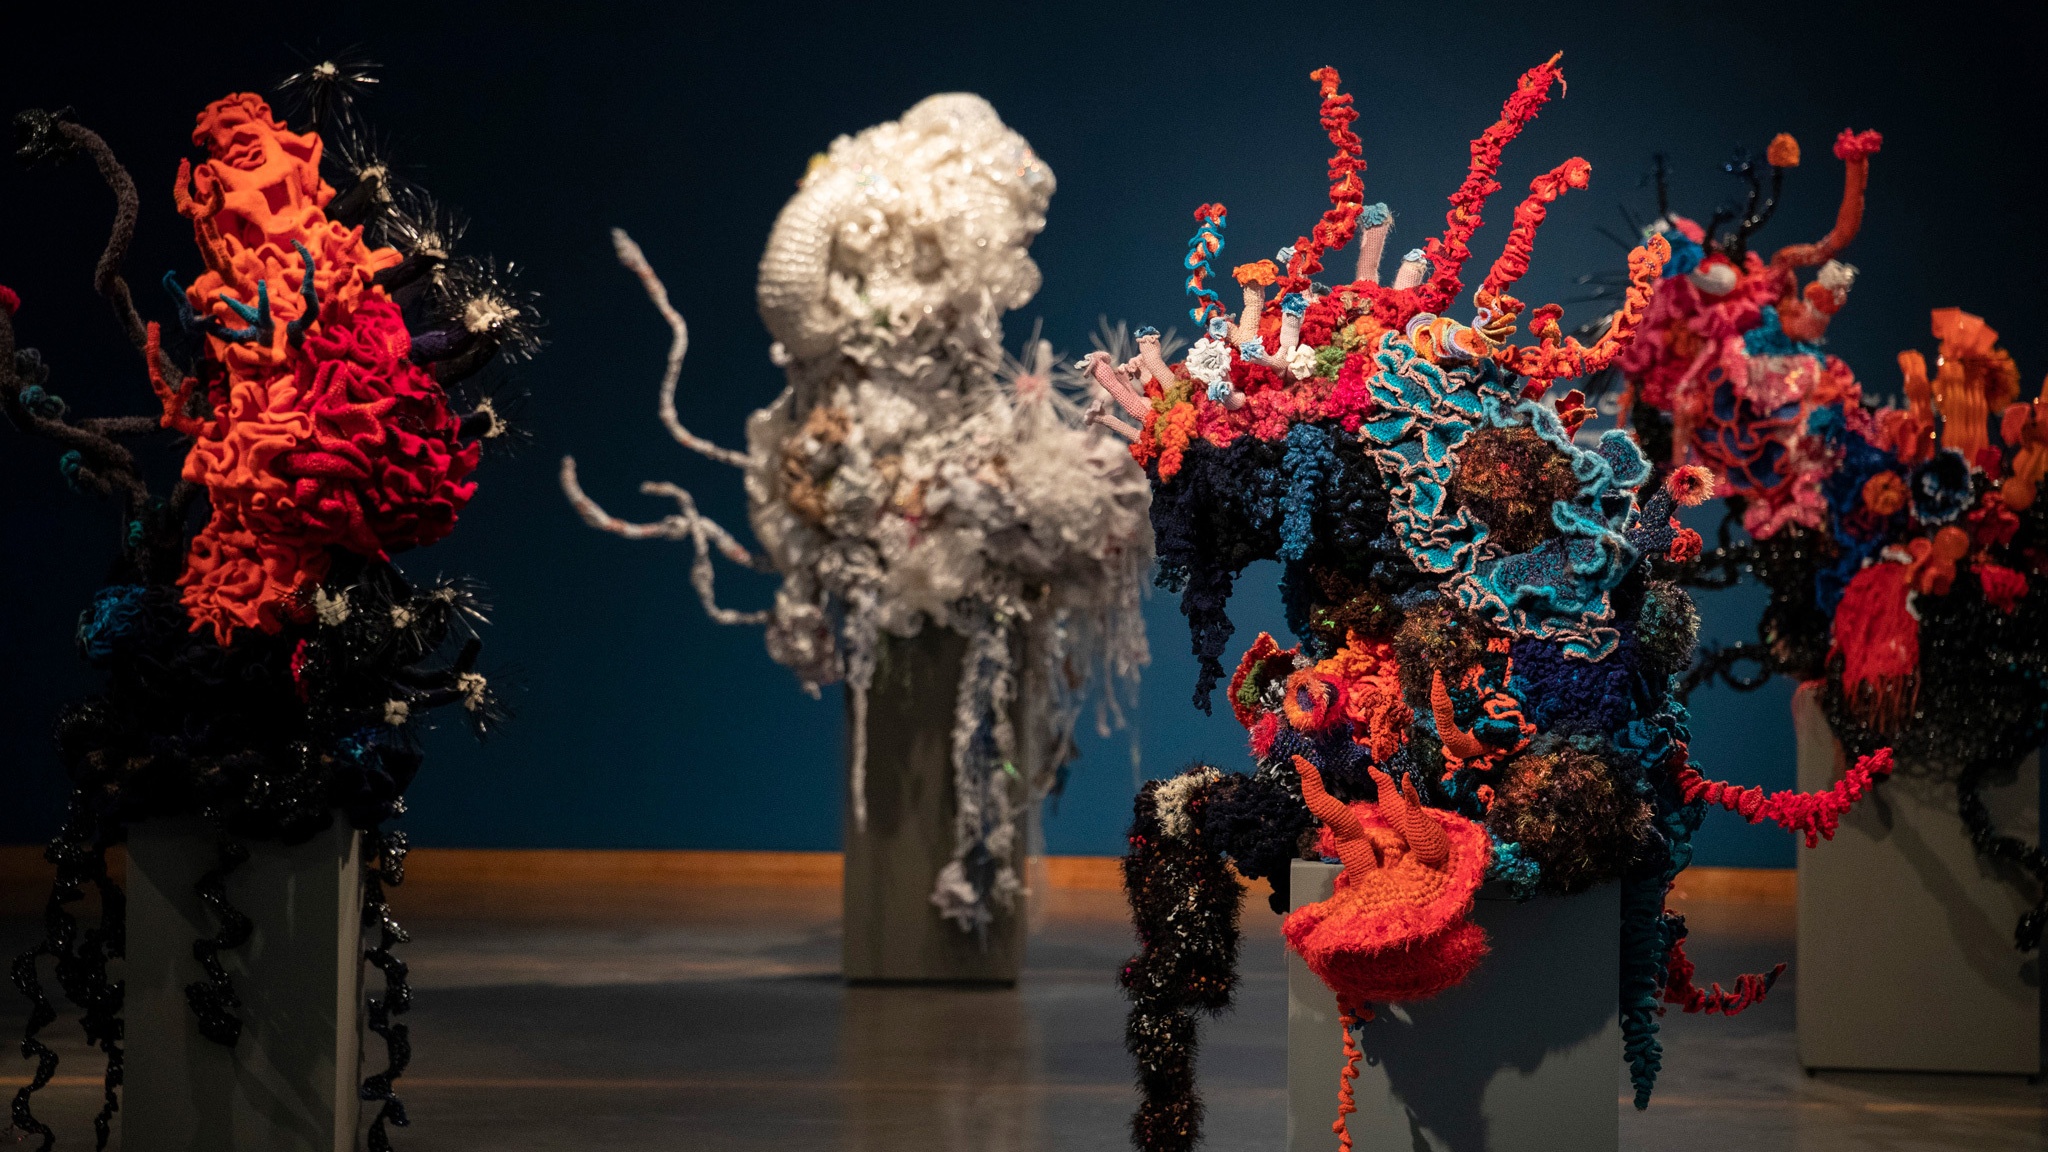 Four multi-colored fiber structures resembling coral reefs sit atop pedestals in a gallery.